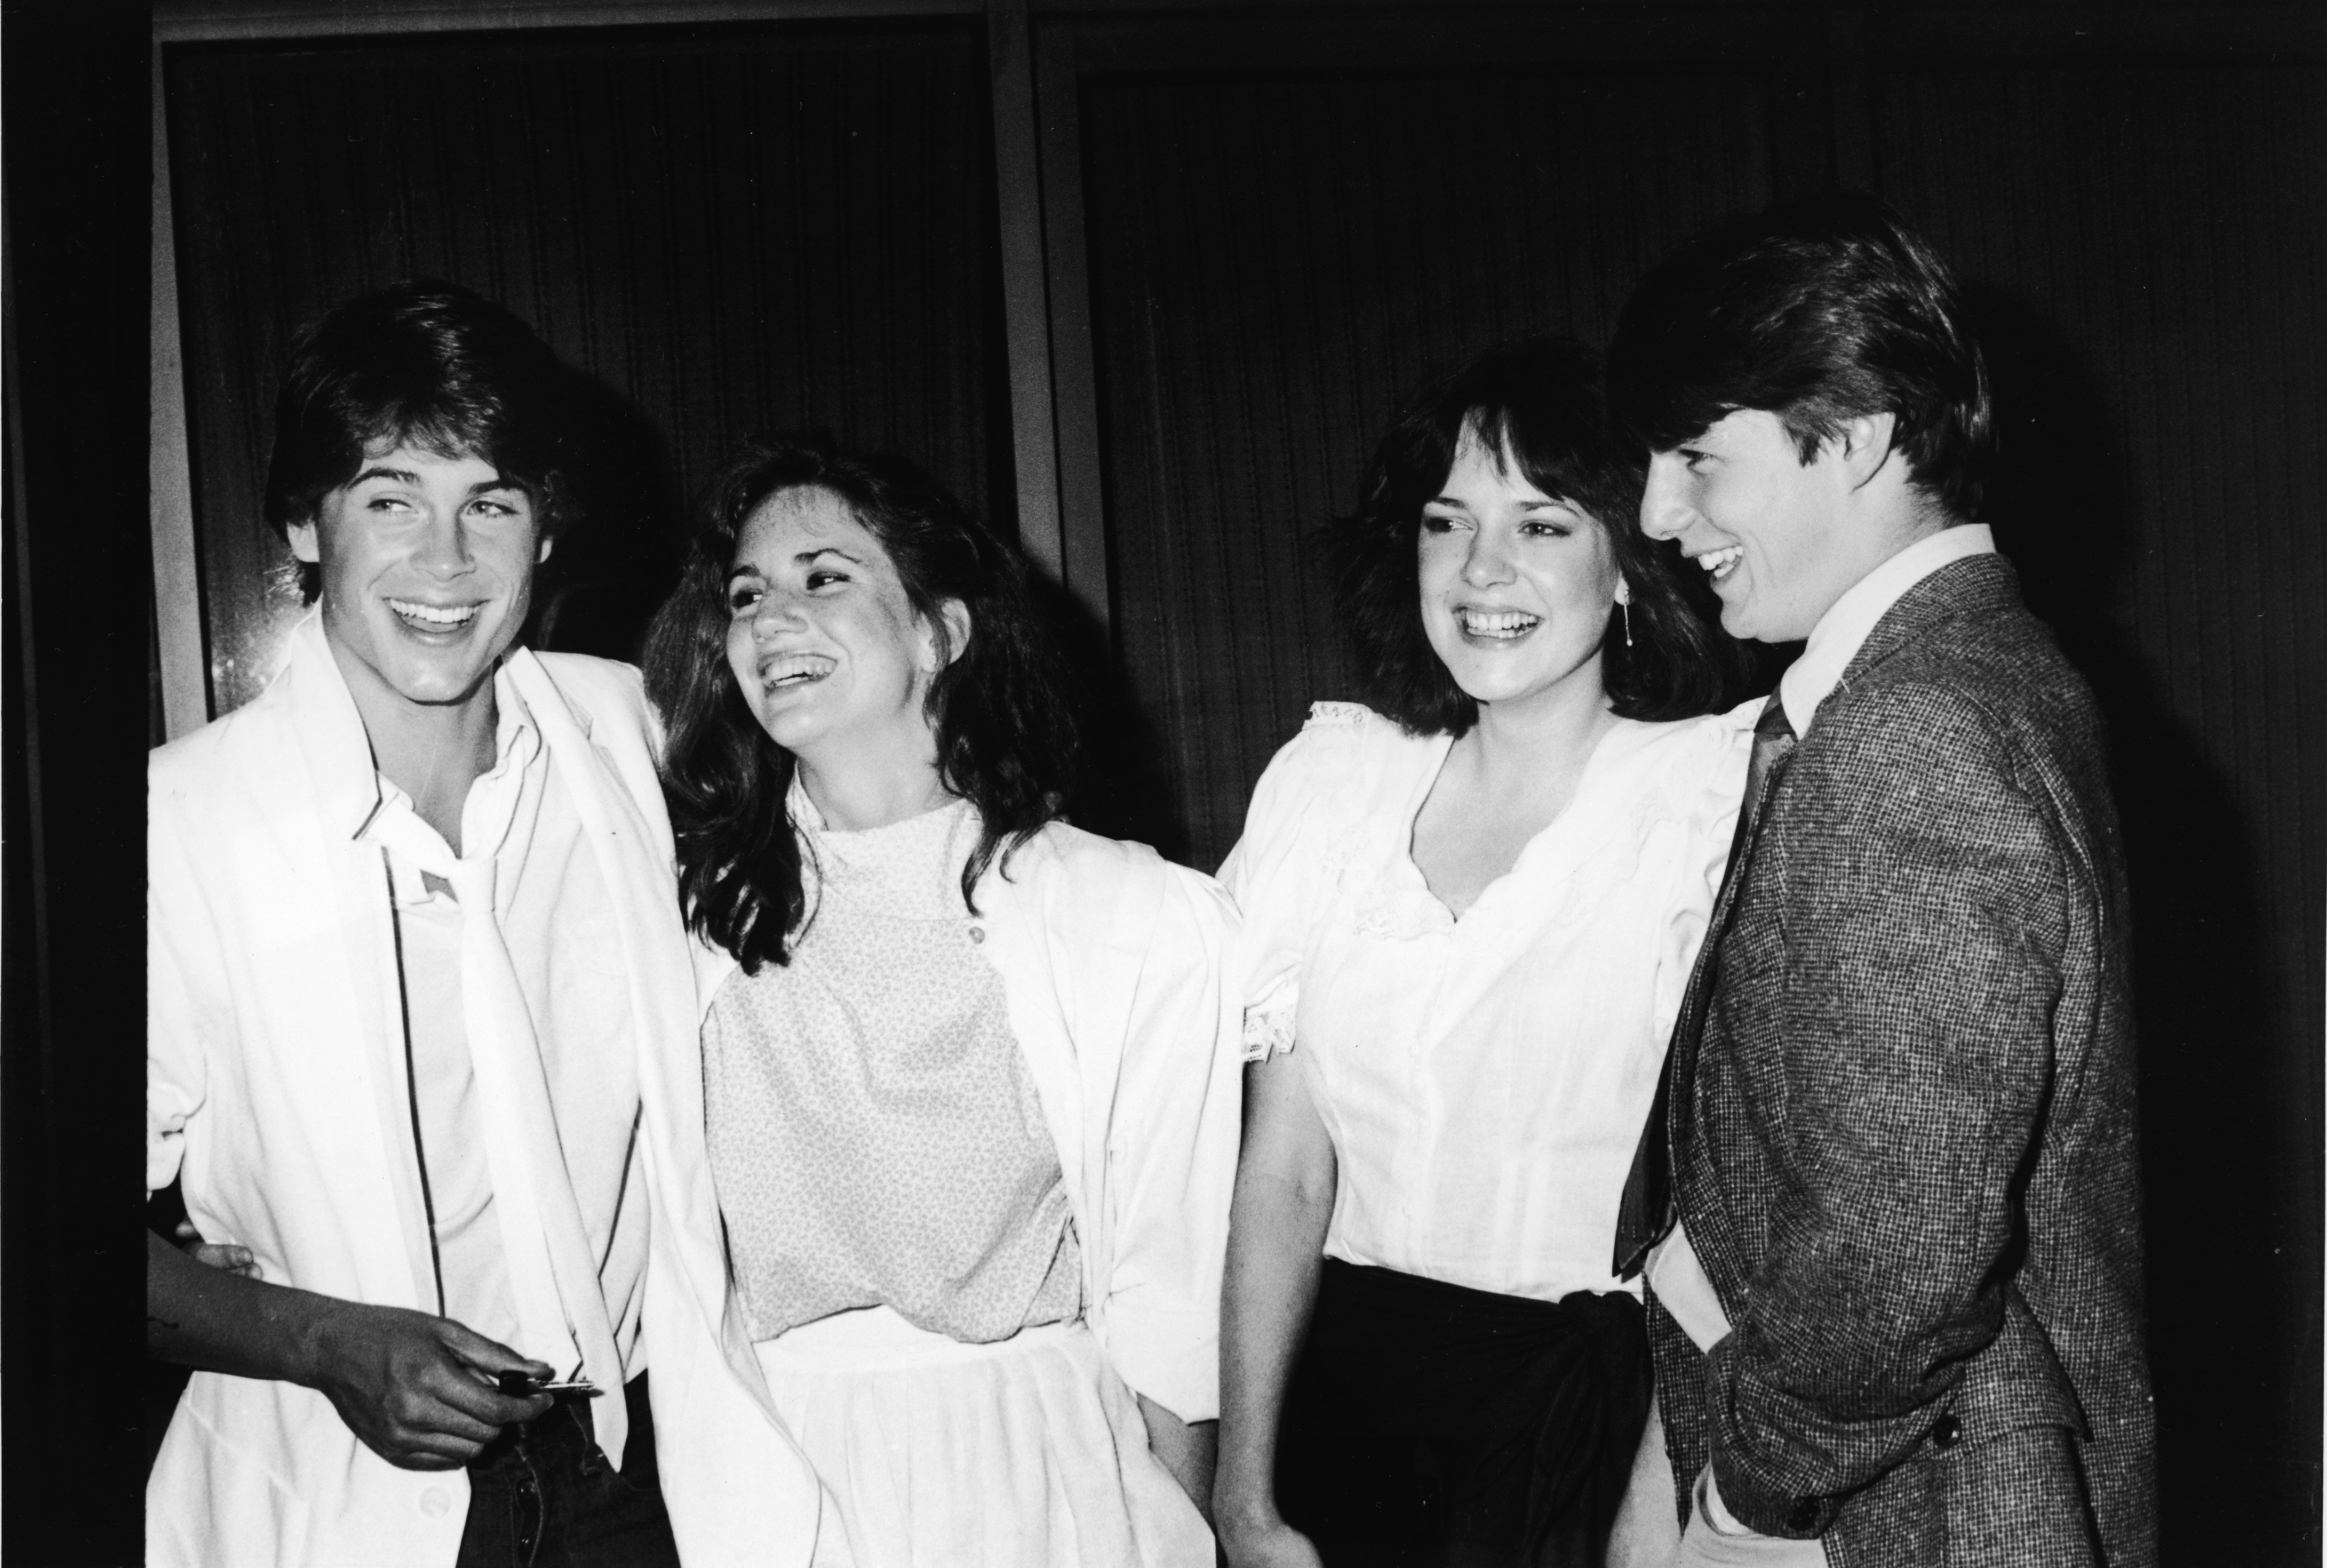 Rob Lowe, Melissa Gilbert, Michelle Meyrink and Tom Cruise at party